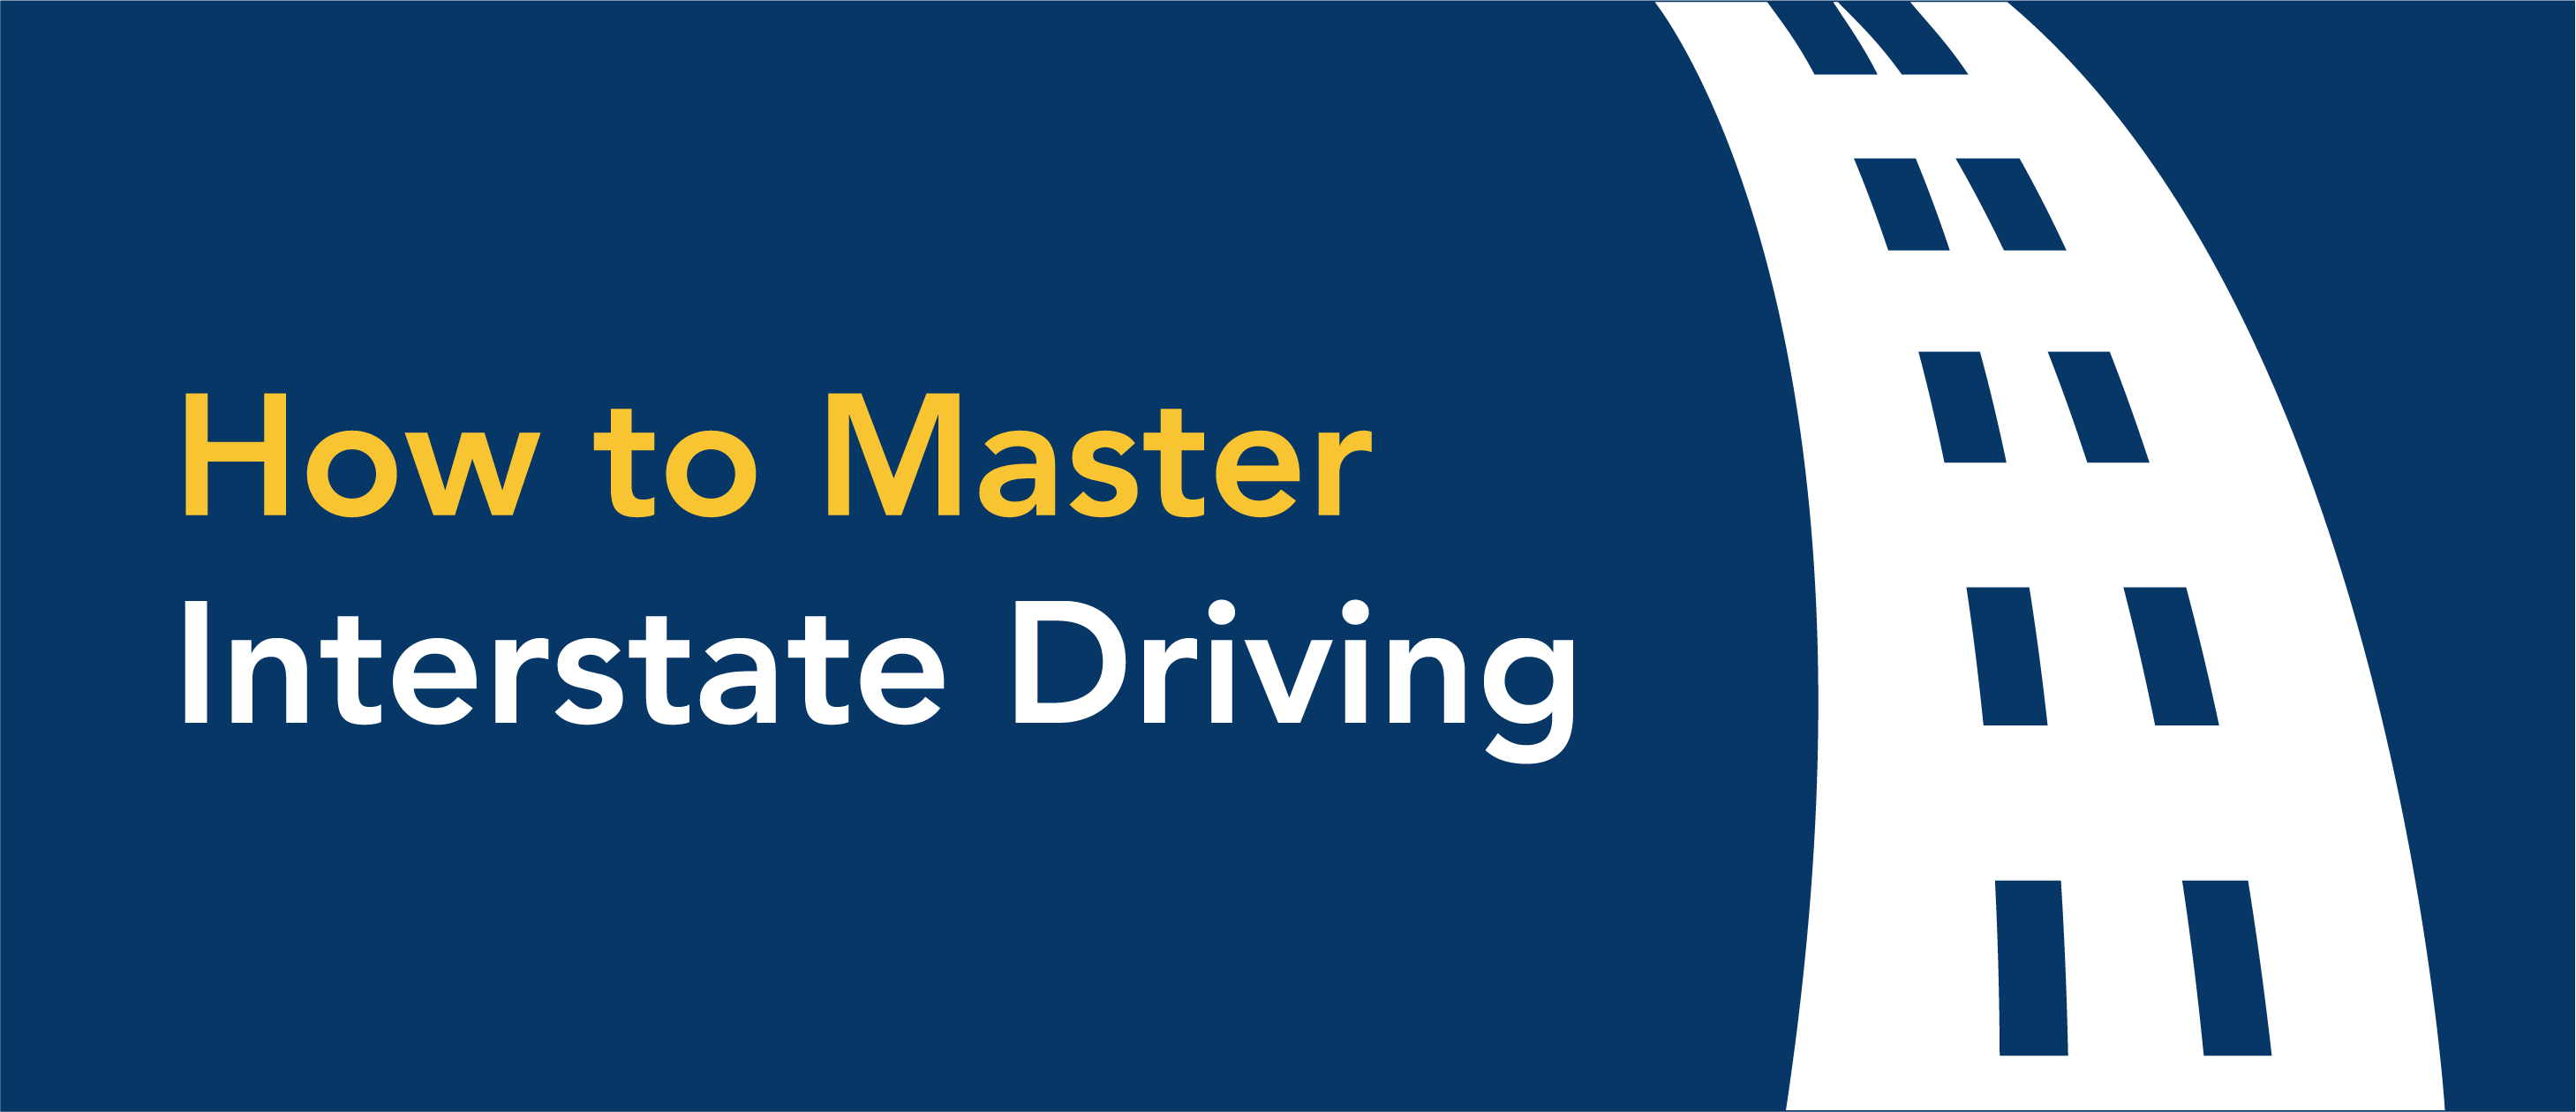 How to master interstate driving